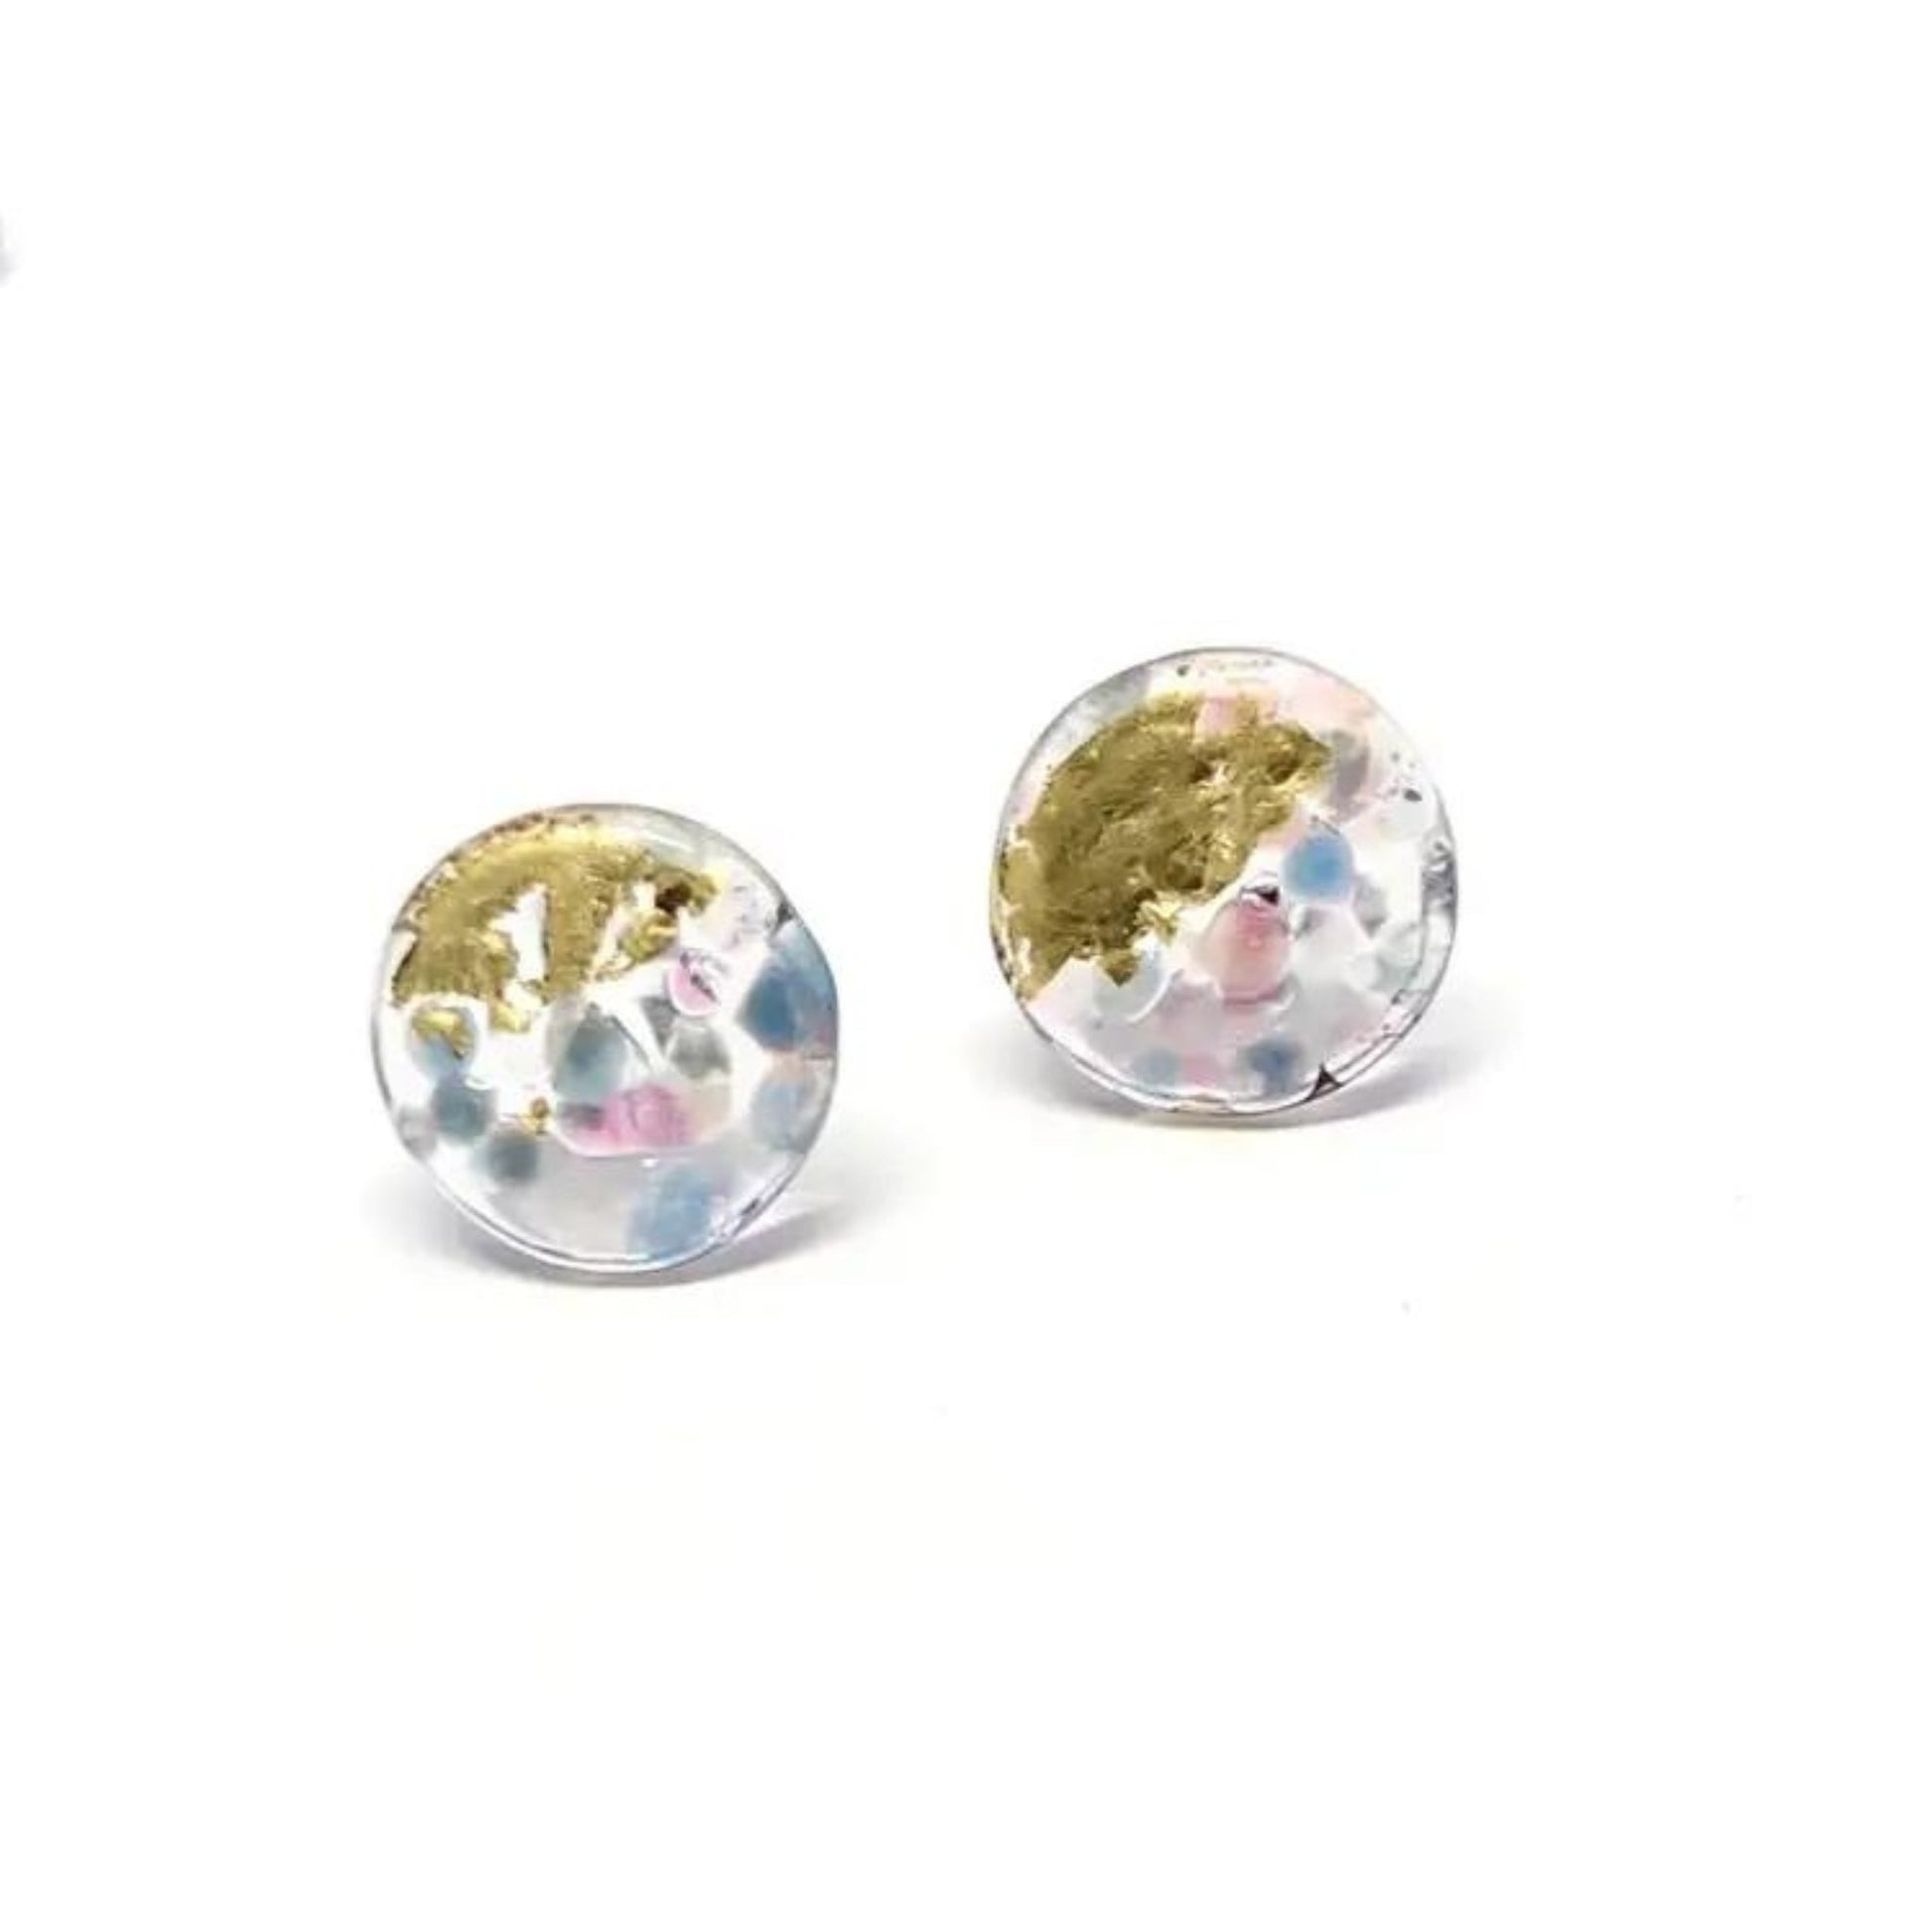 Glass and Gold Midi Mottled Stud Earrings - Cotton - The Little Jewellery Company